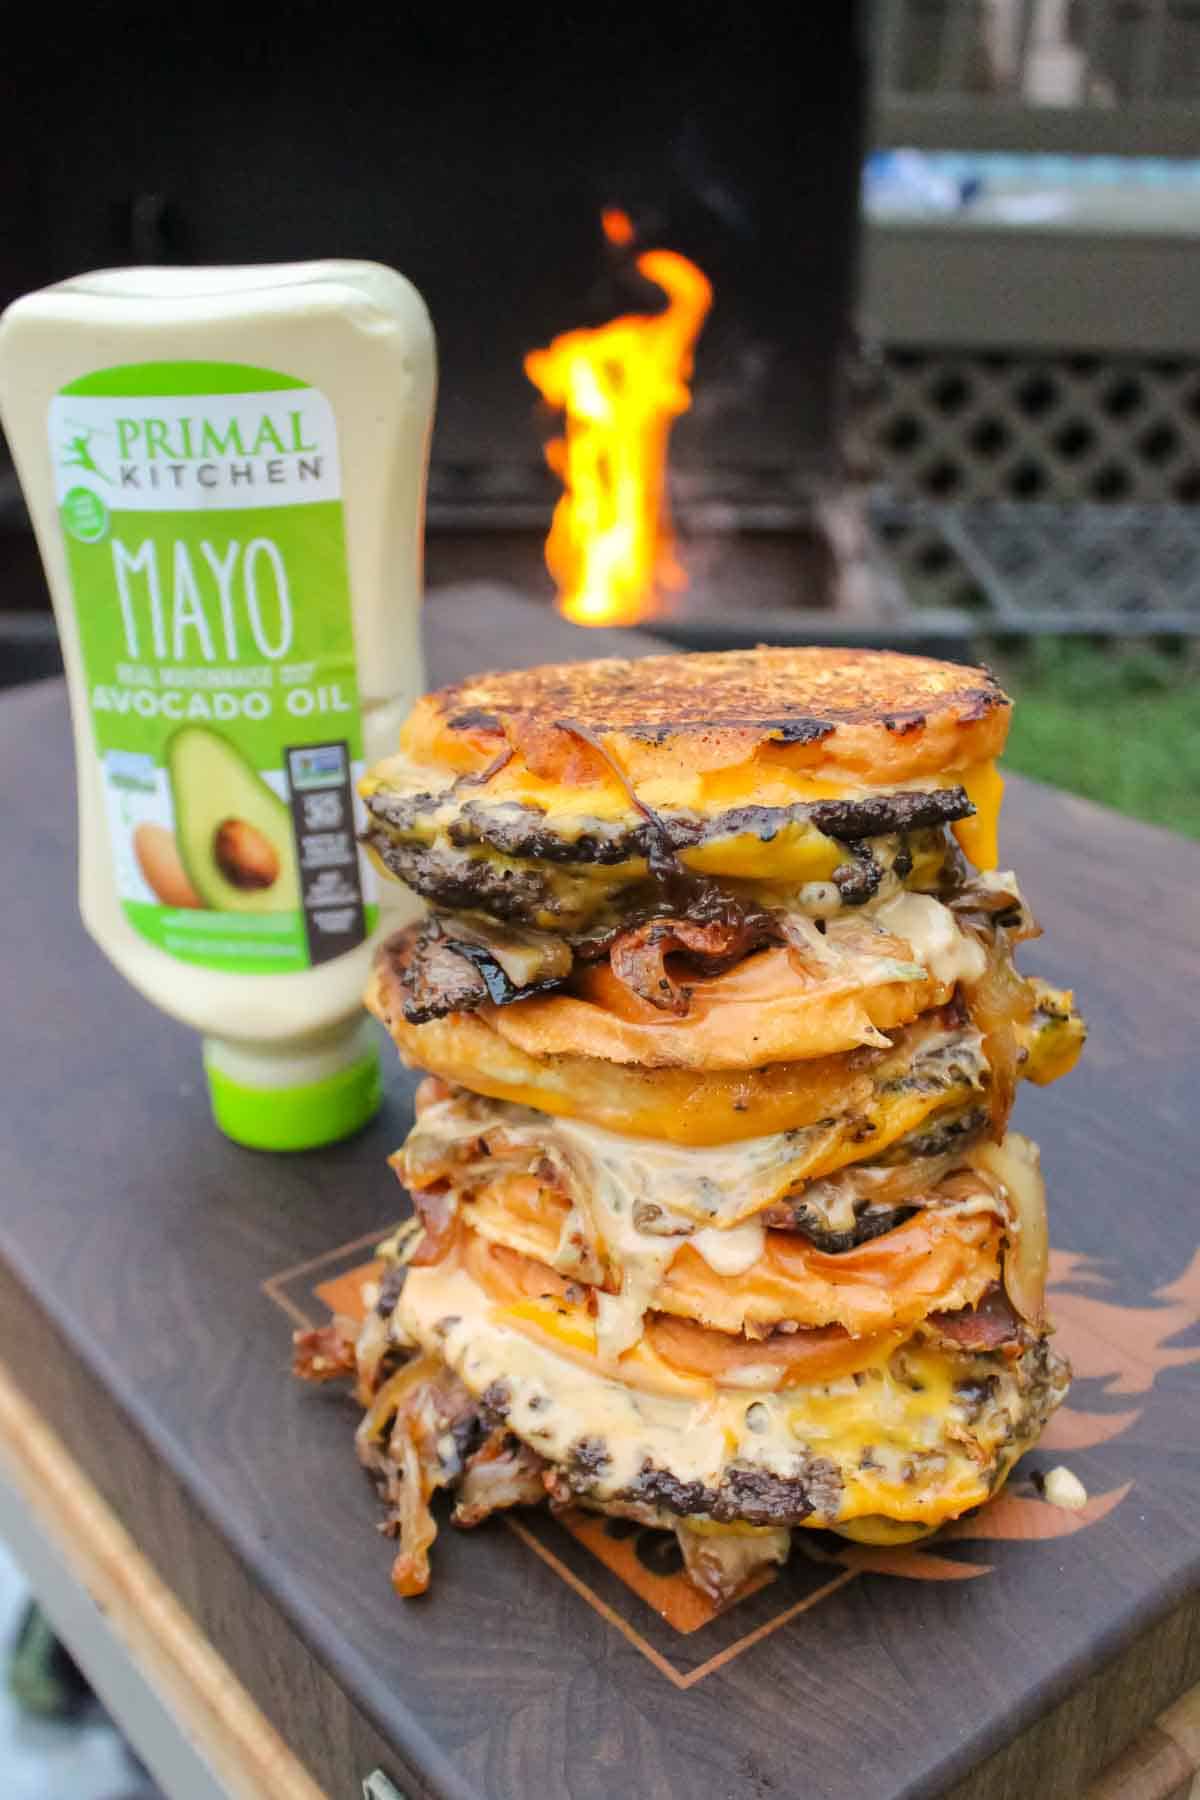 The Animal Style Patty Melts stacked on top of each other and sitting in front of the Primal Kitchen Mayo.